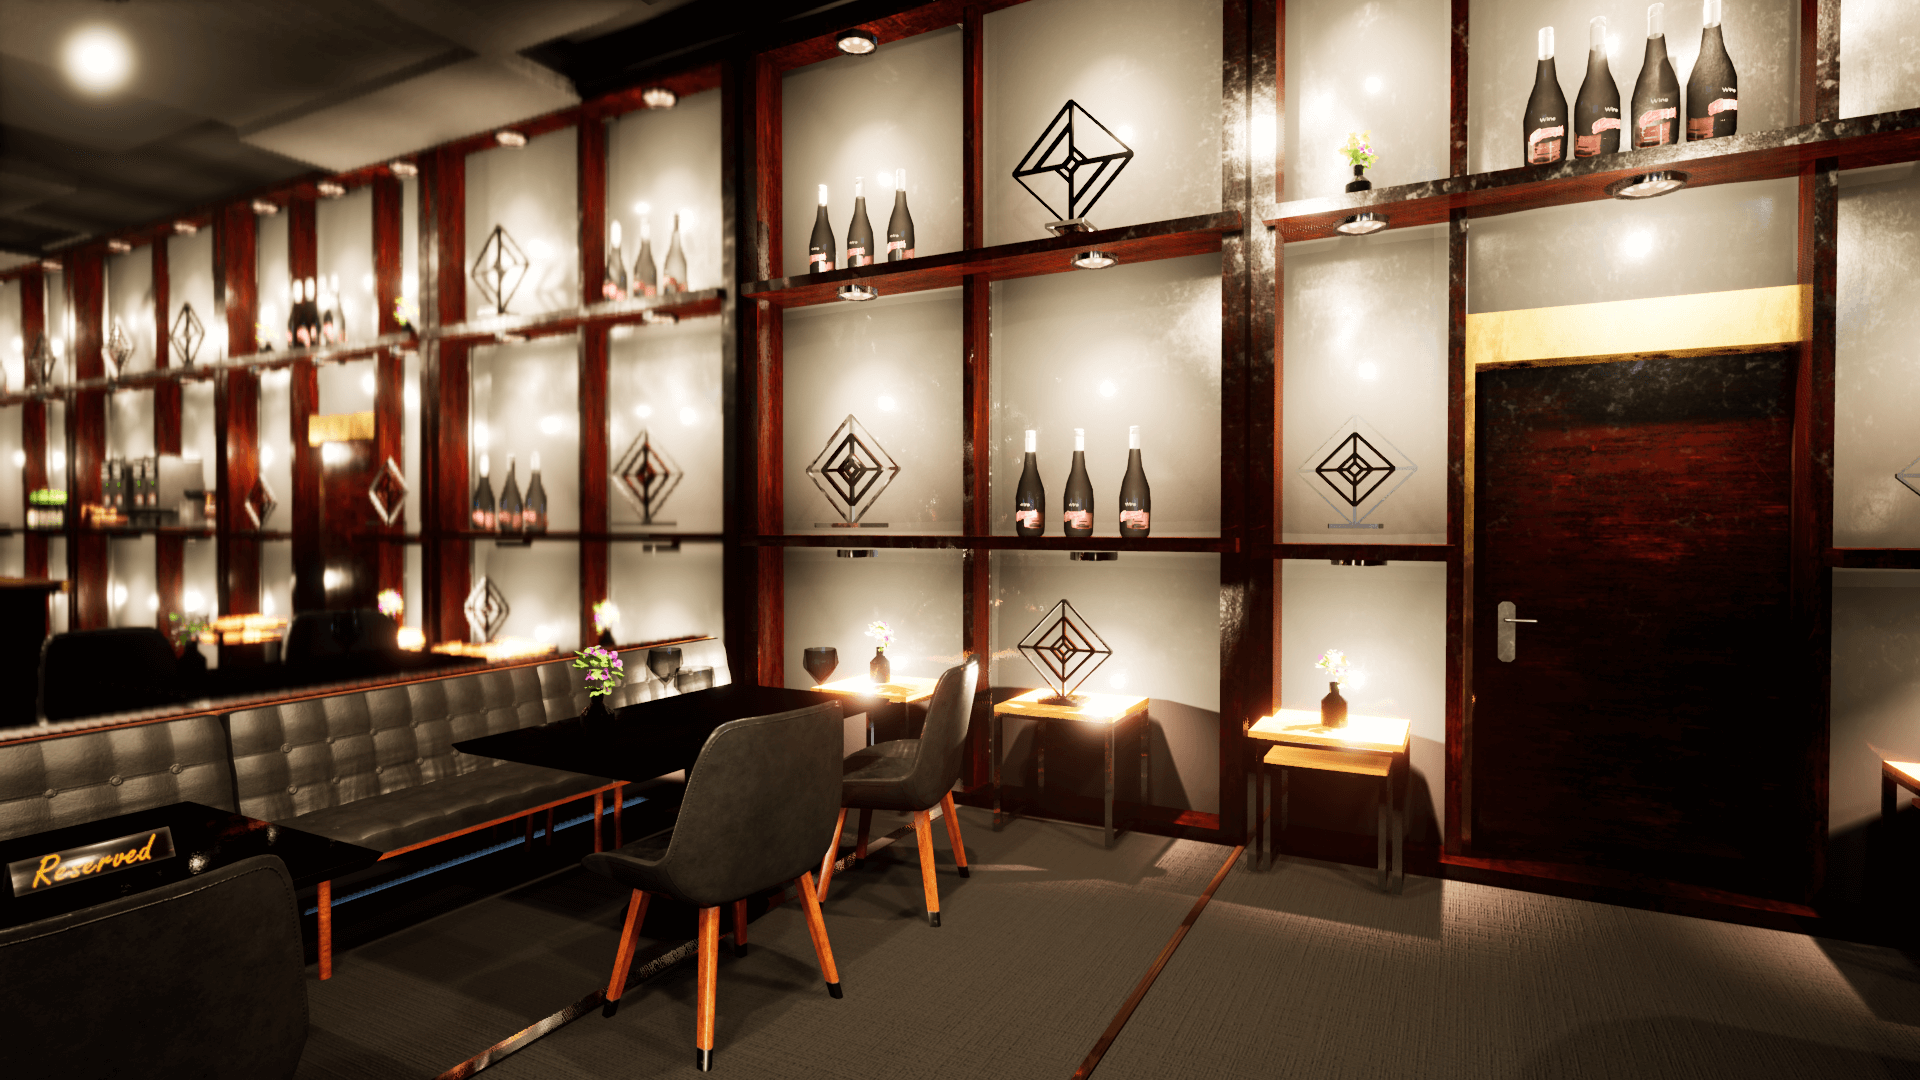 An image showing The Bar asset pack, created with Unreal Engine.